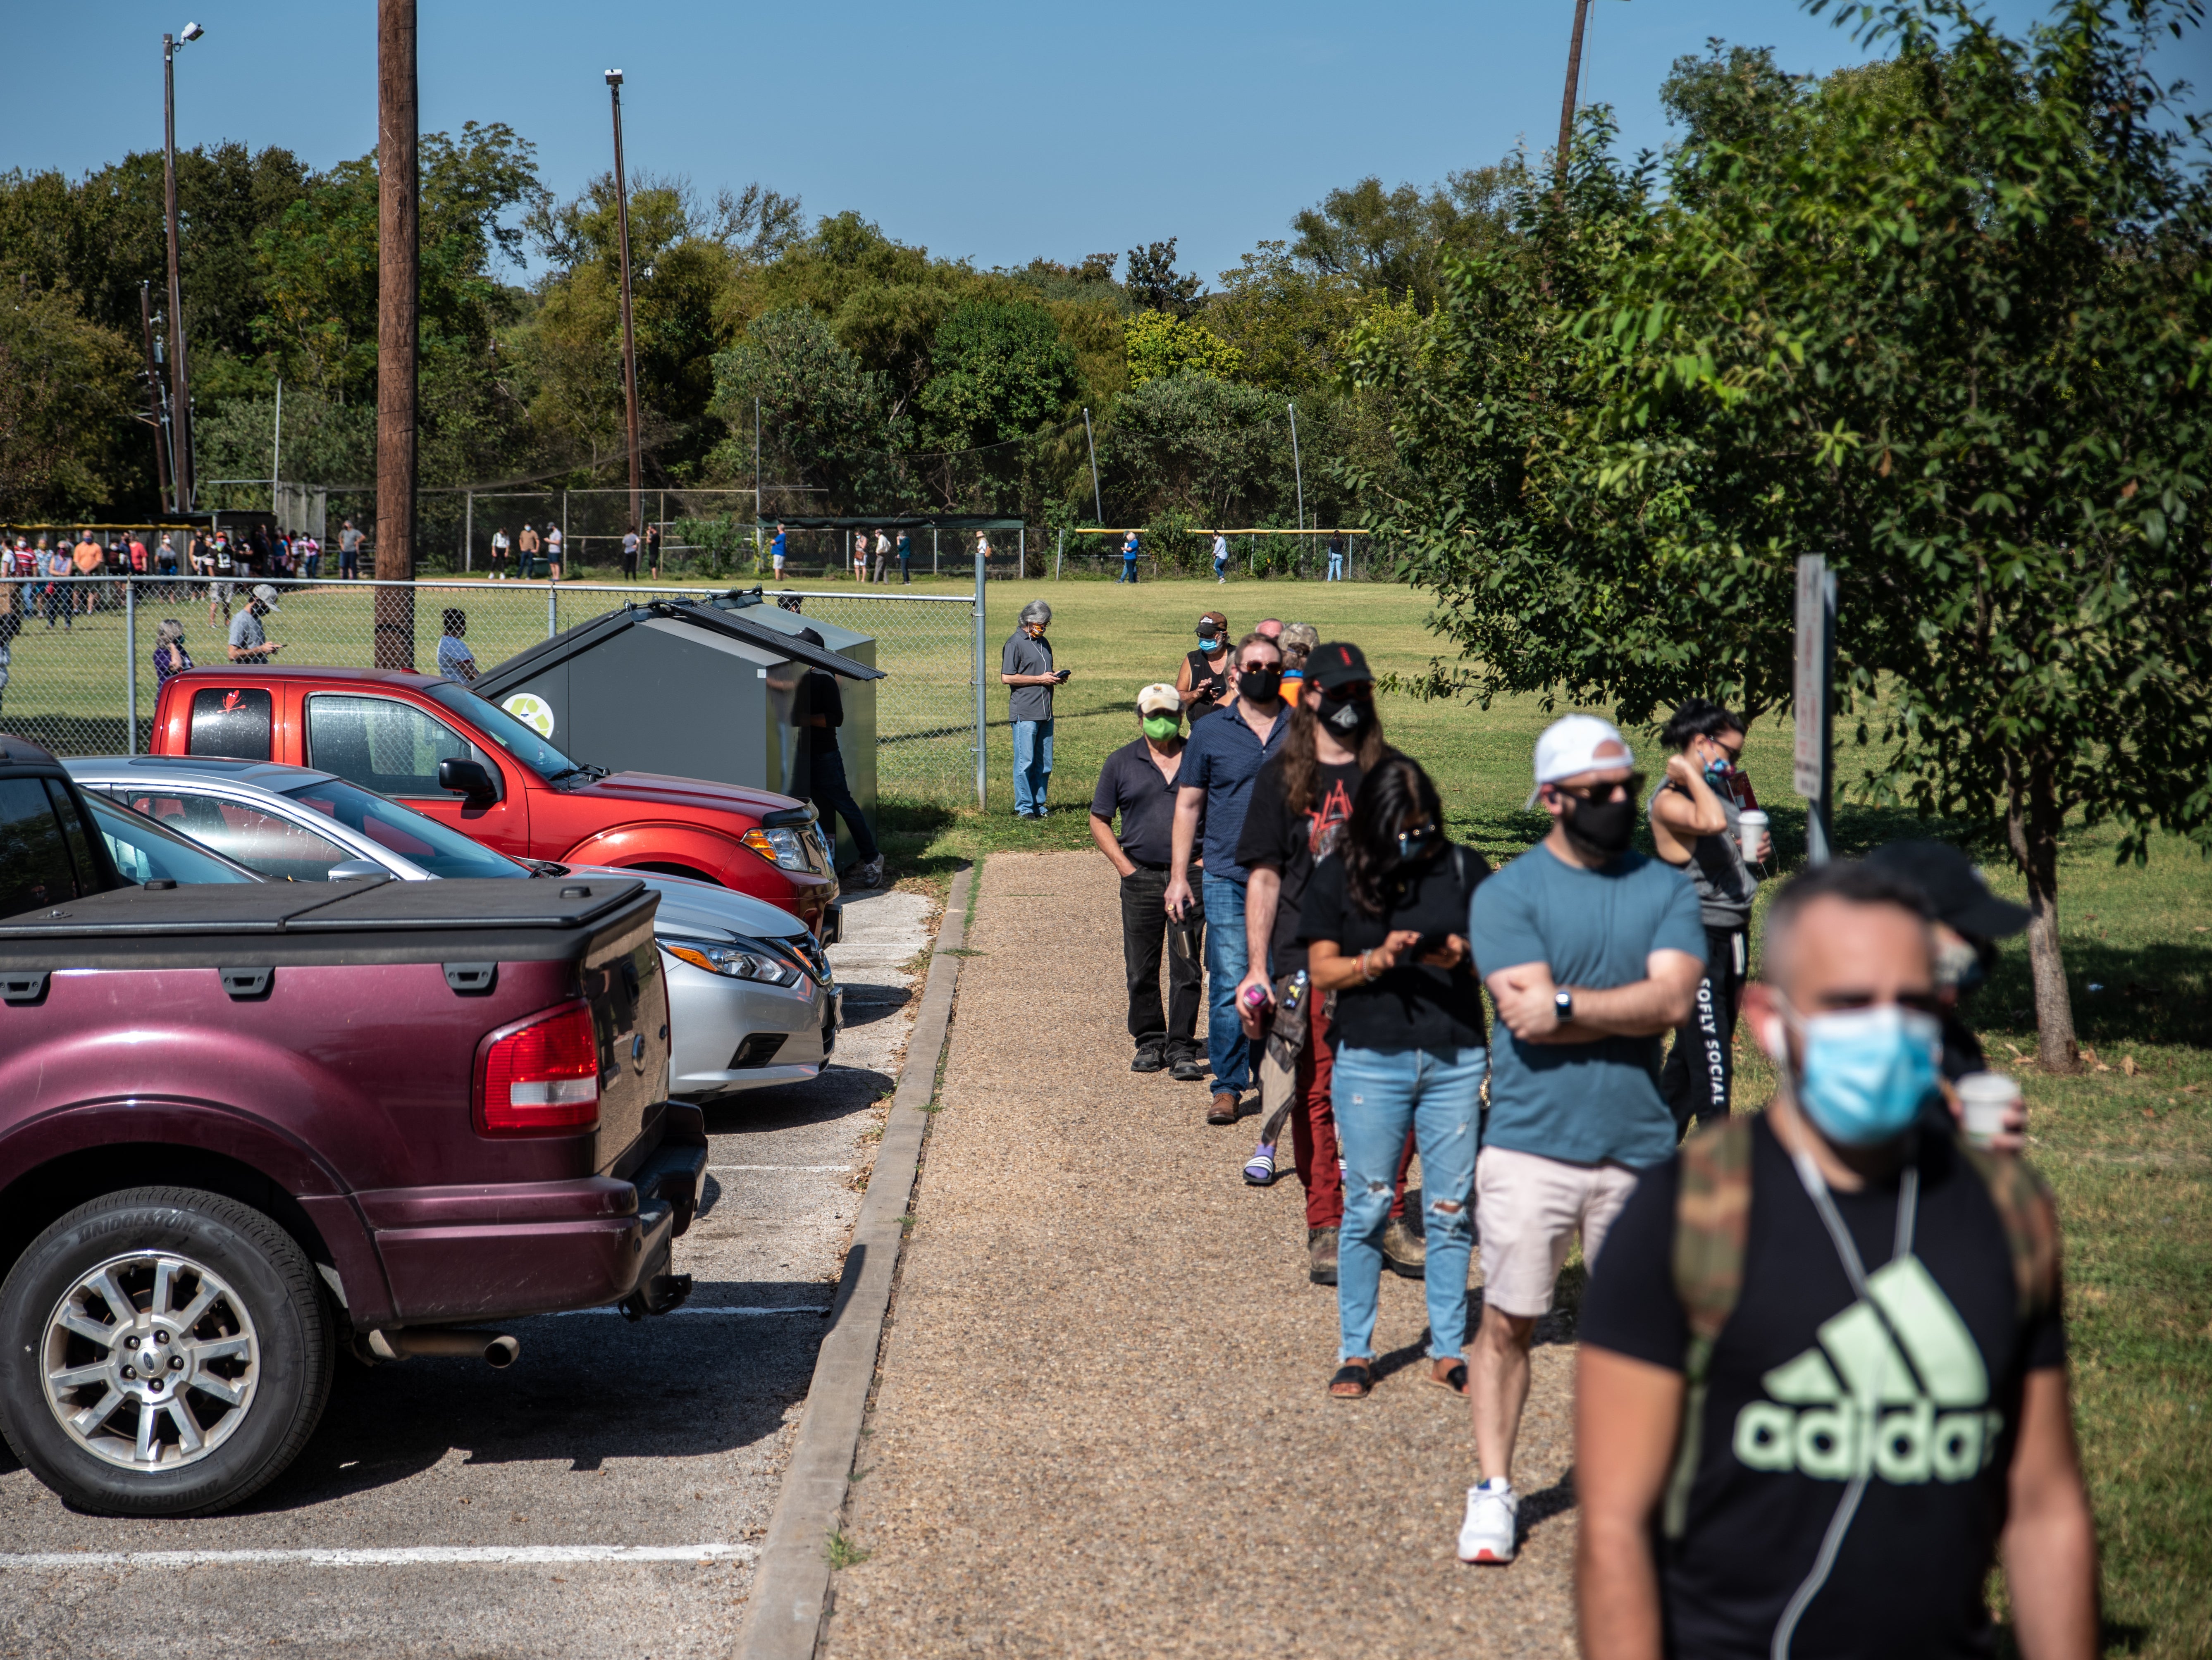 Early voters wait in line at a polling location on 13 October in Austin, Texas